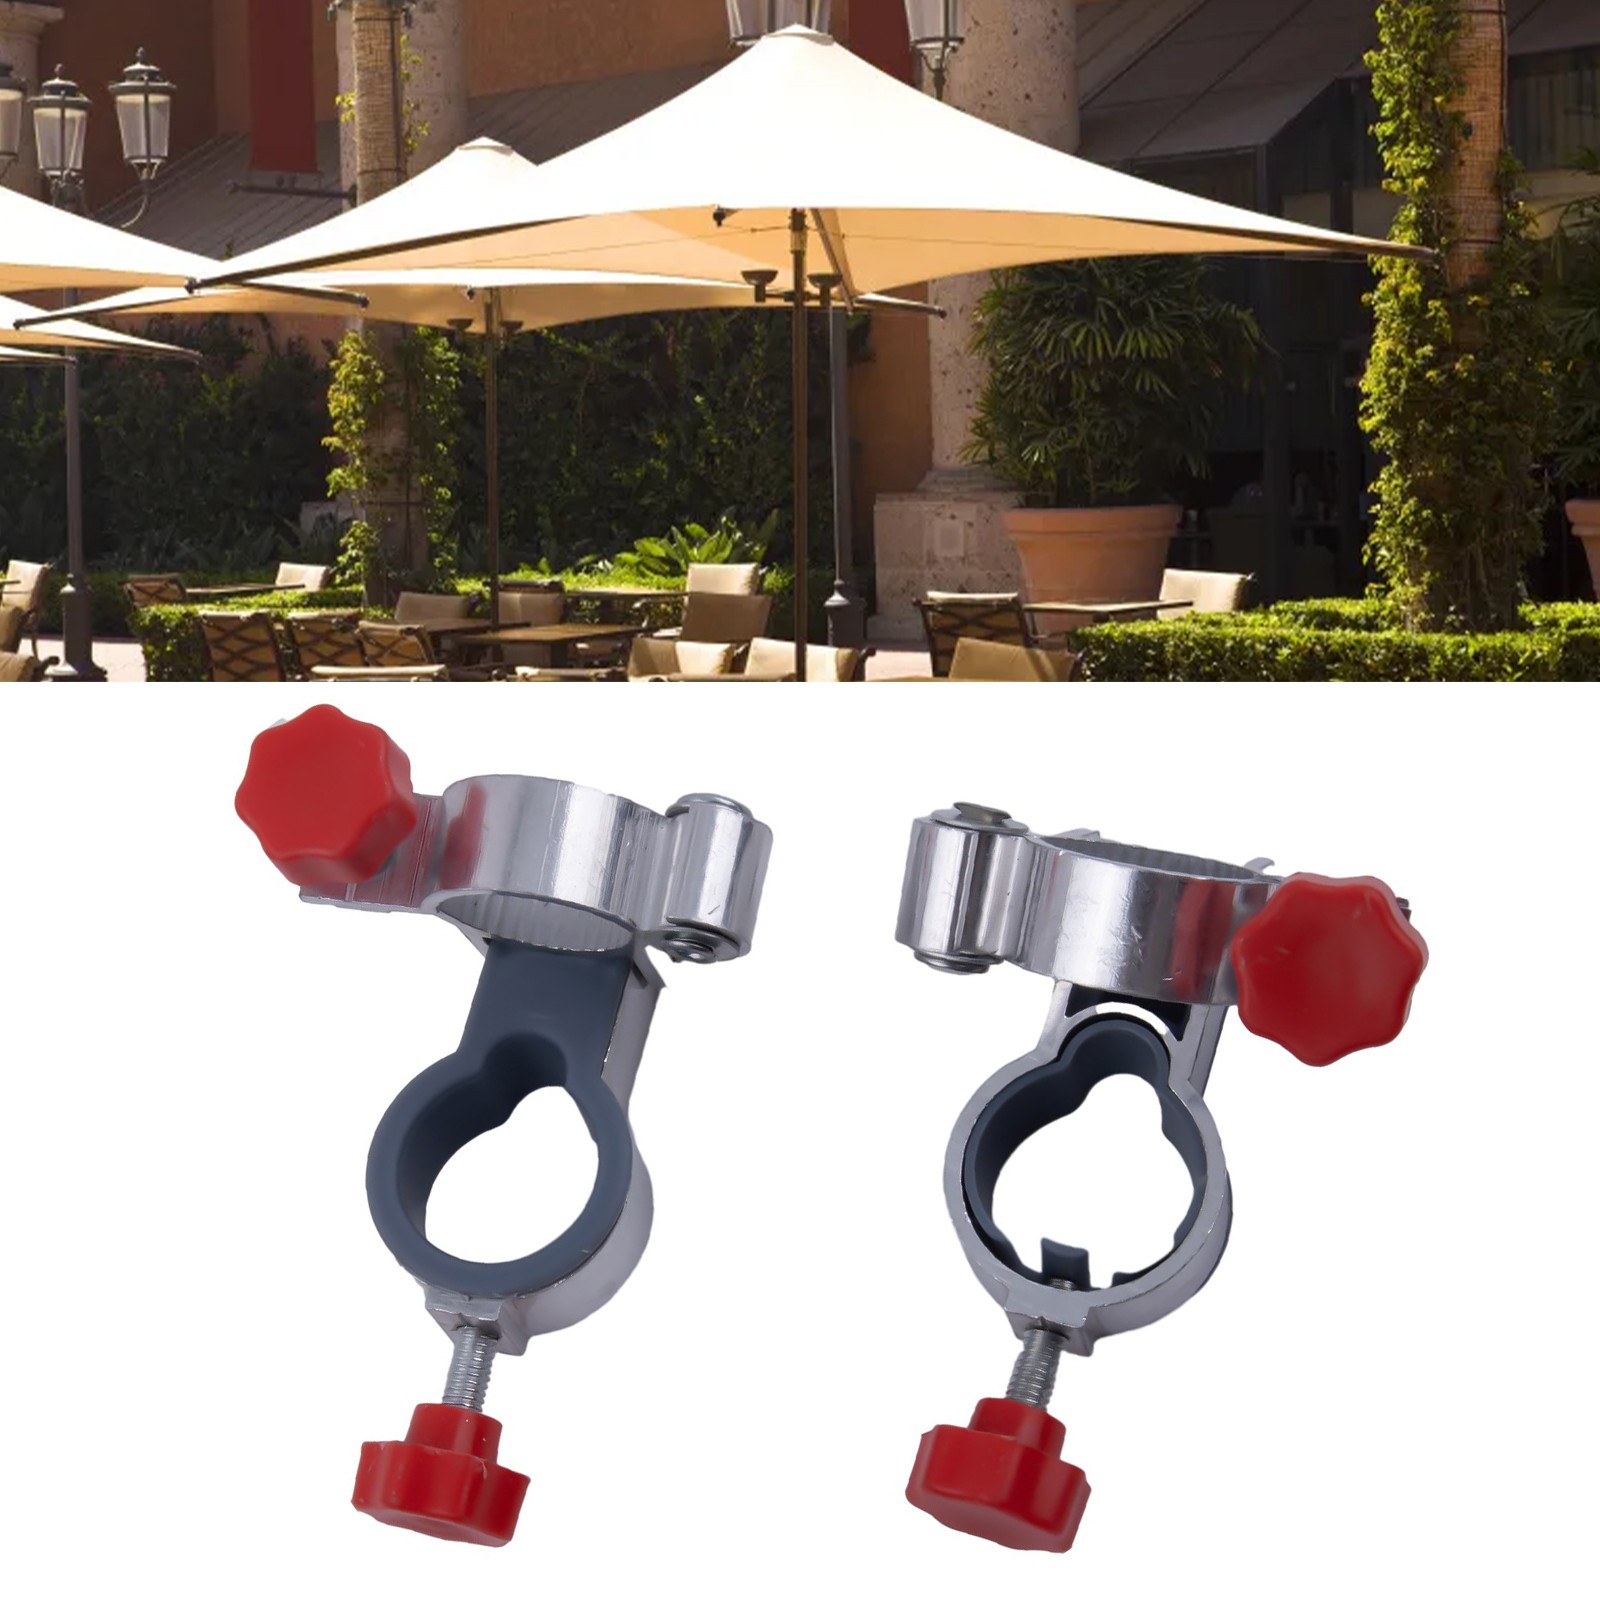 2x Fishing Chair Umbrella Stand Clamp Beach Outdoor Umbrella Holder Clip  for